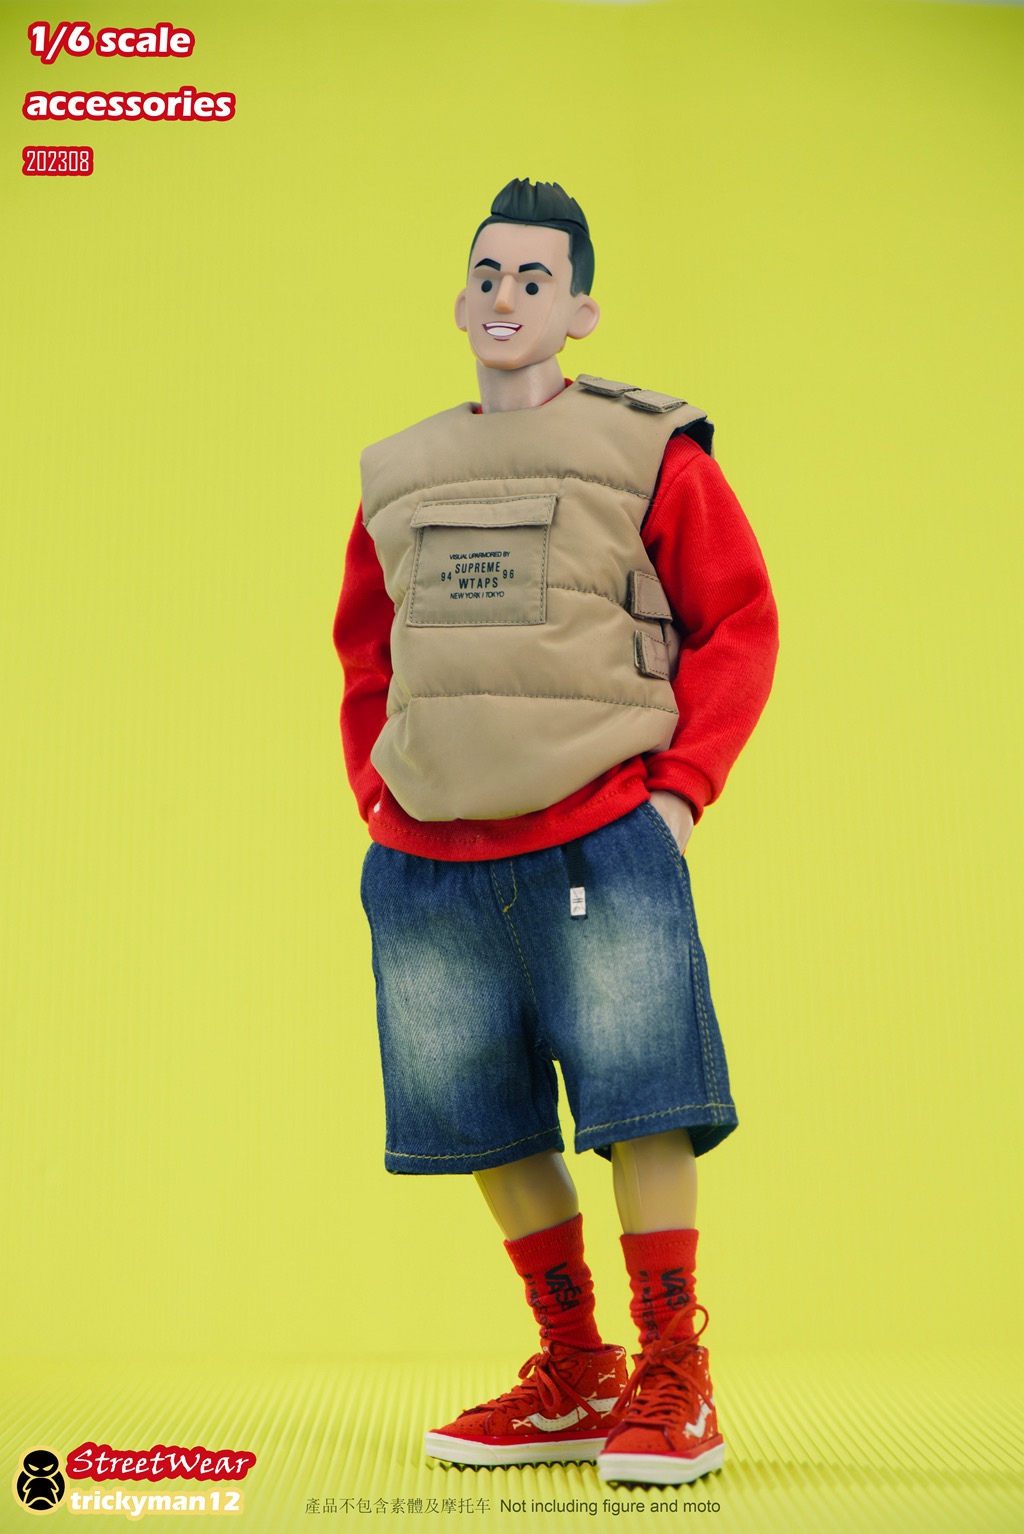 trickyMan12 - NEW PRODUCT: TrickyMan12: 1/6th Scale StreetWear Clothes Set (#202308) 19262210